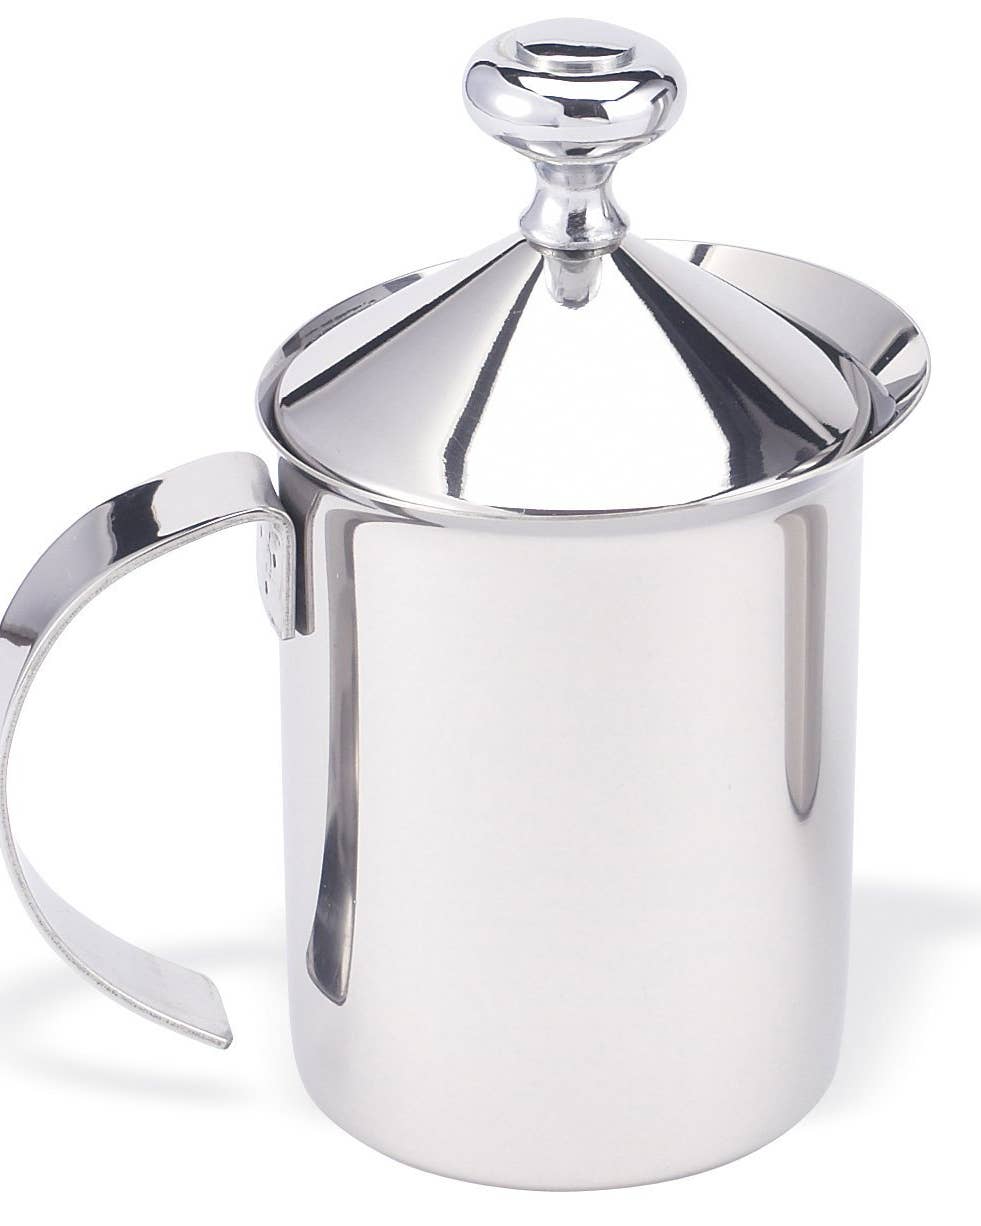 One Good Find: Stainless Steel Milk Frother